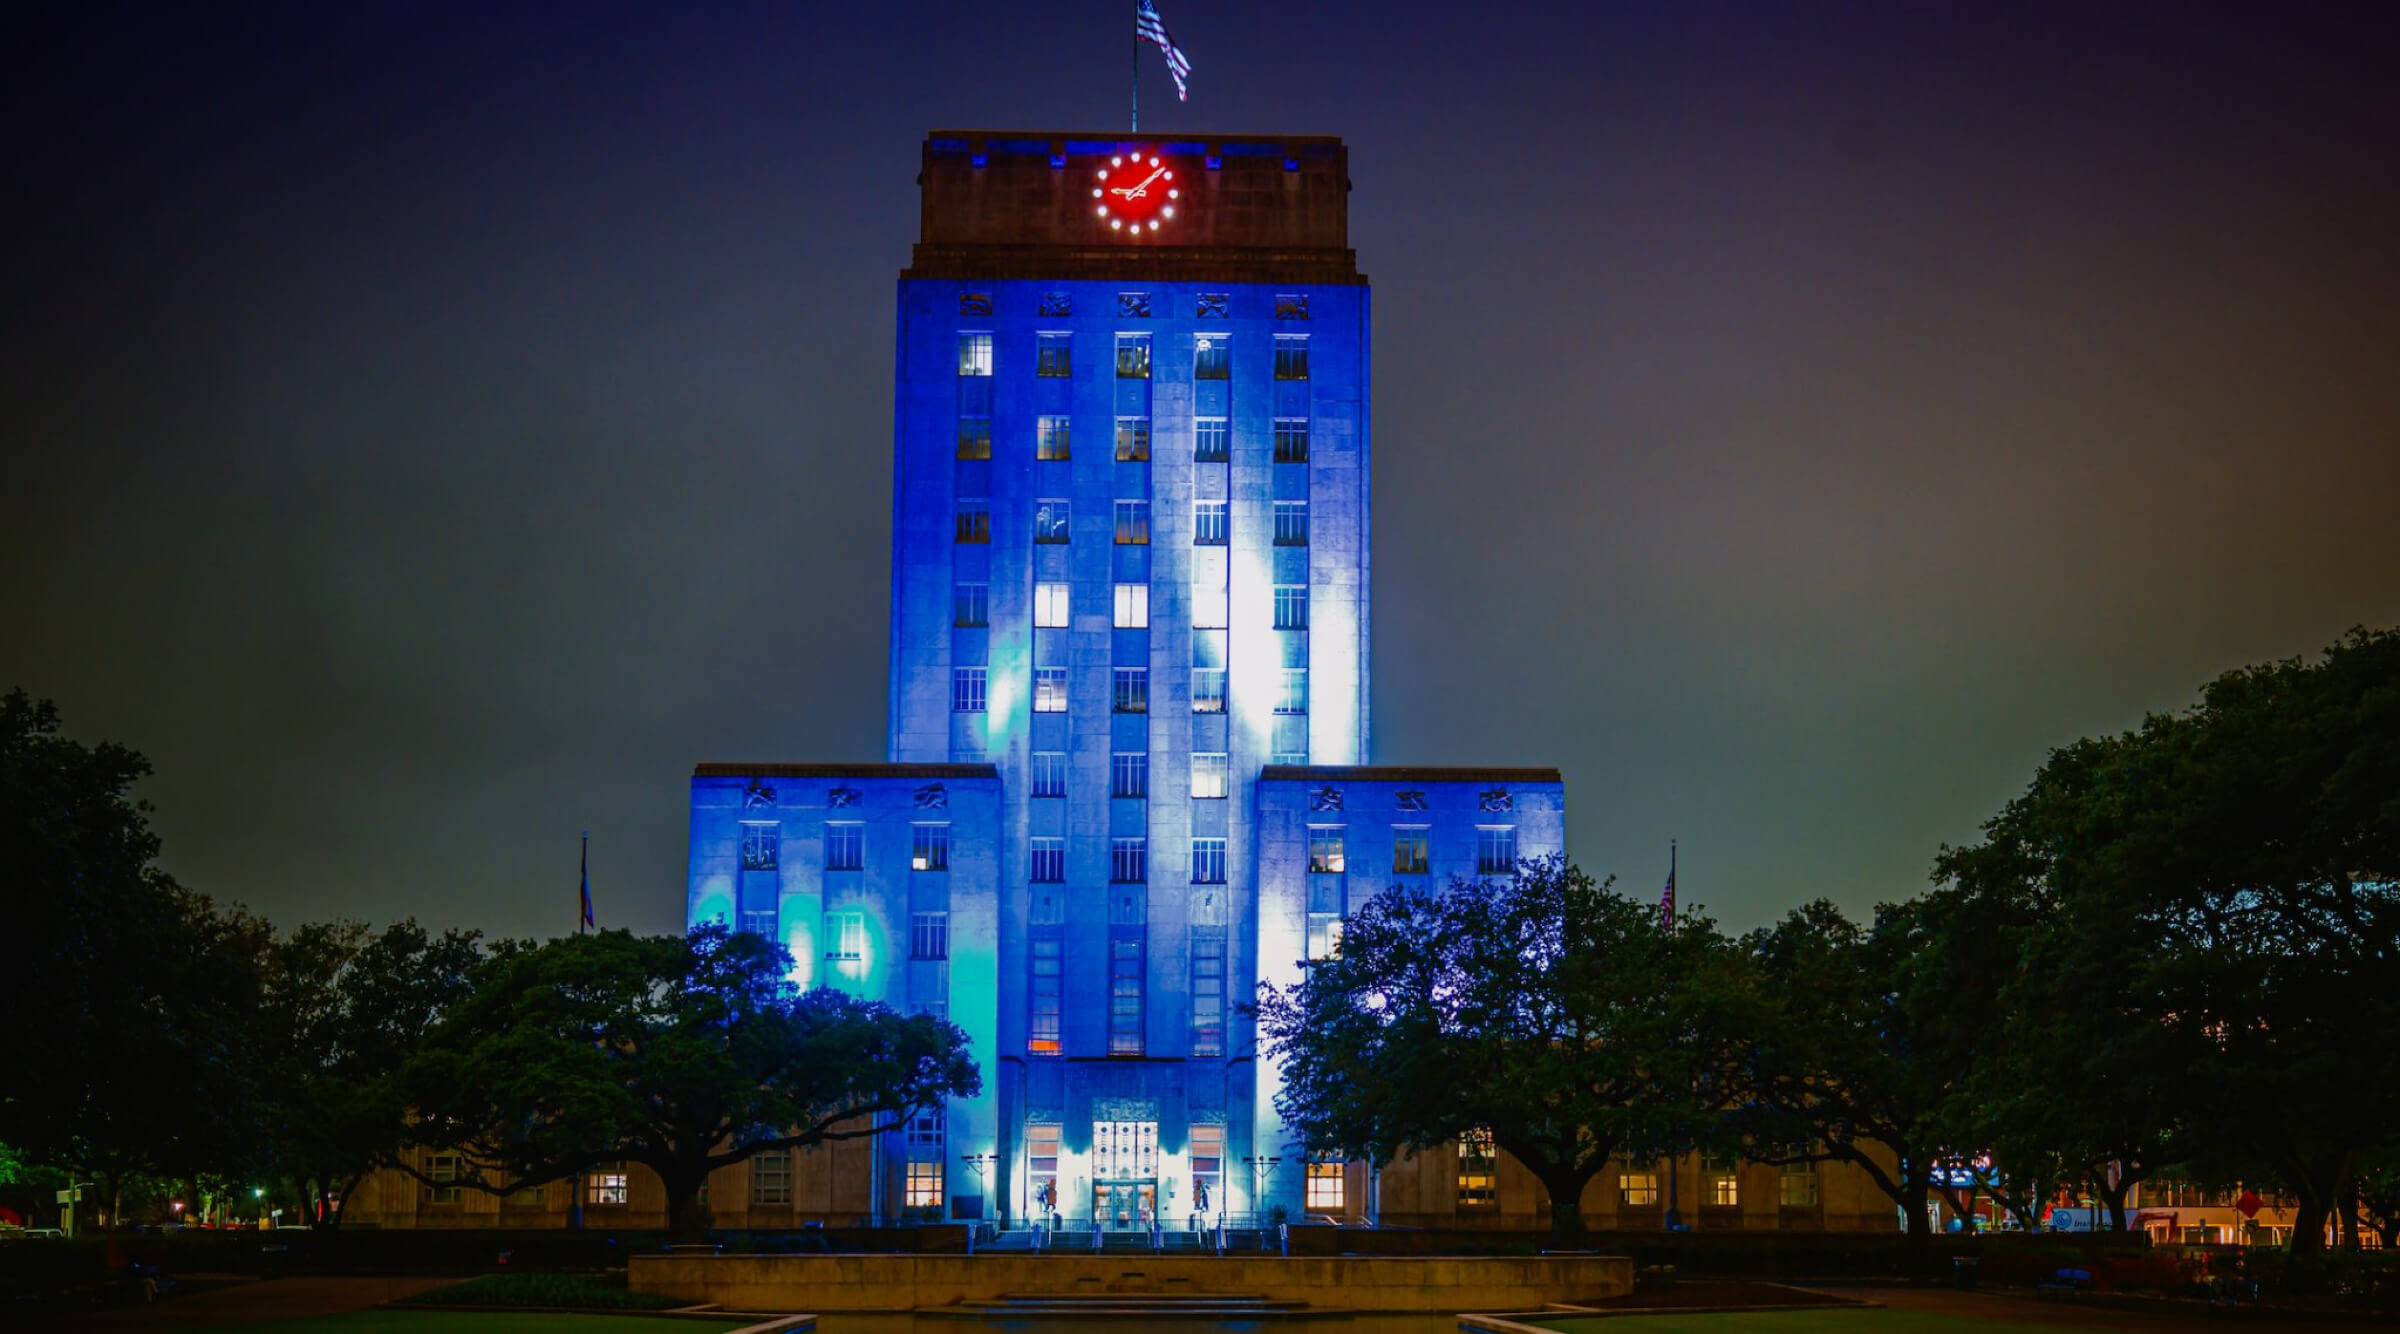 The city hall building in Houston, Texas, lit up for Israel's independence day in April 2021